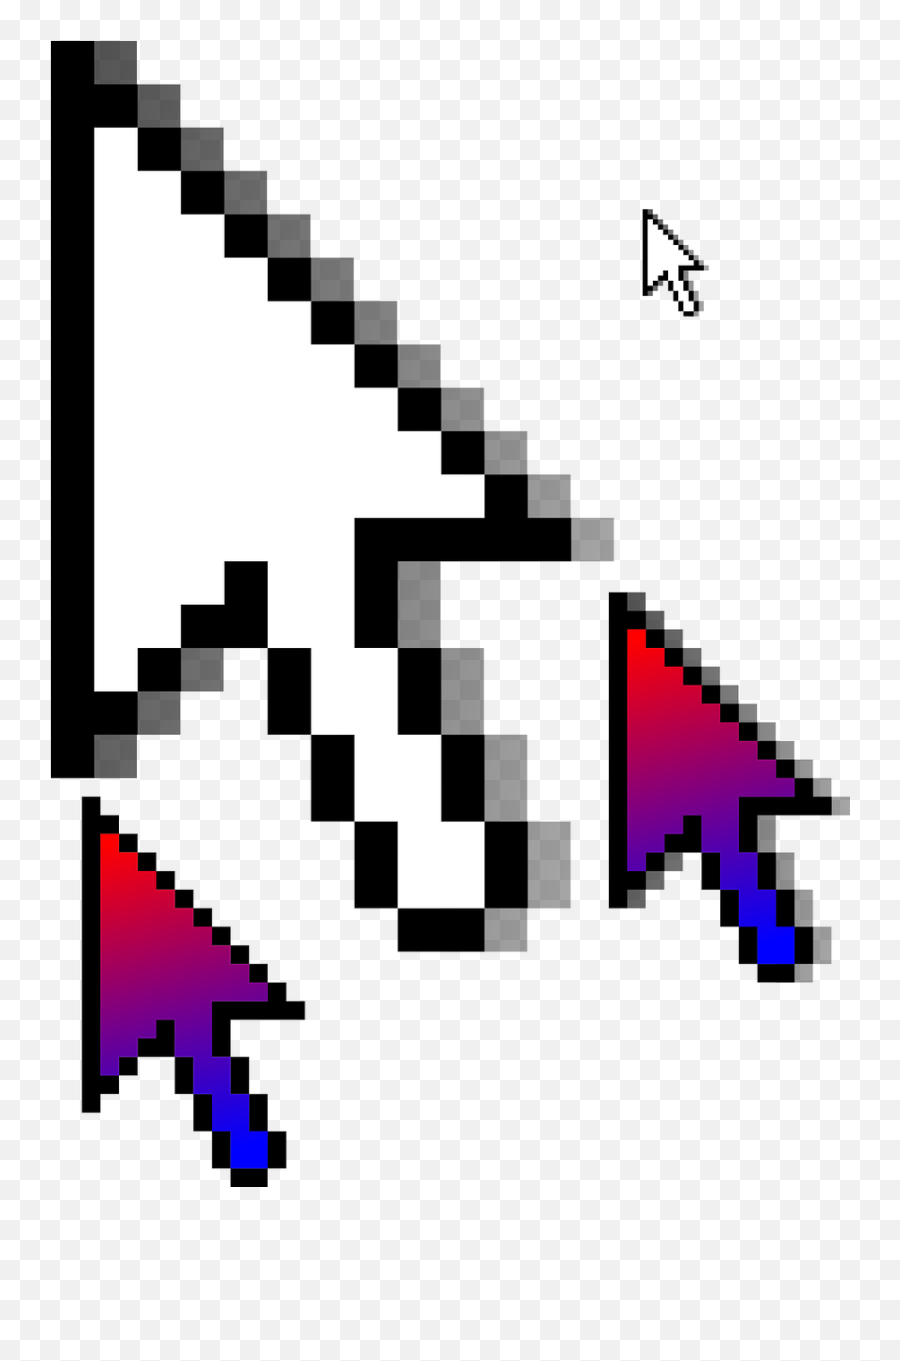 Cursor Arrow Pointer Mouse Computer - Computer Mouse On Screen Emoji,Finger Point Right Emoji